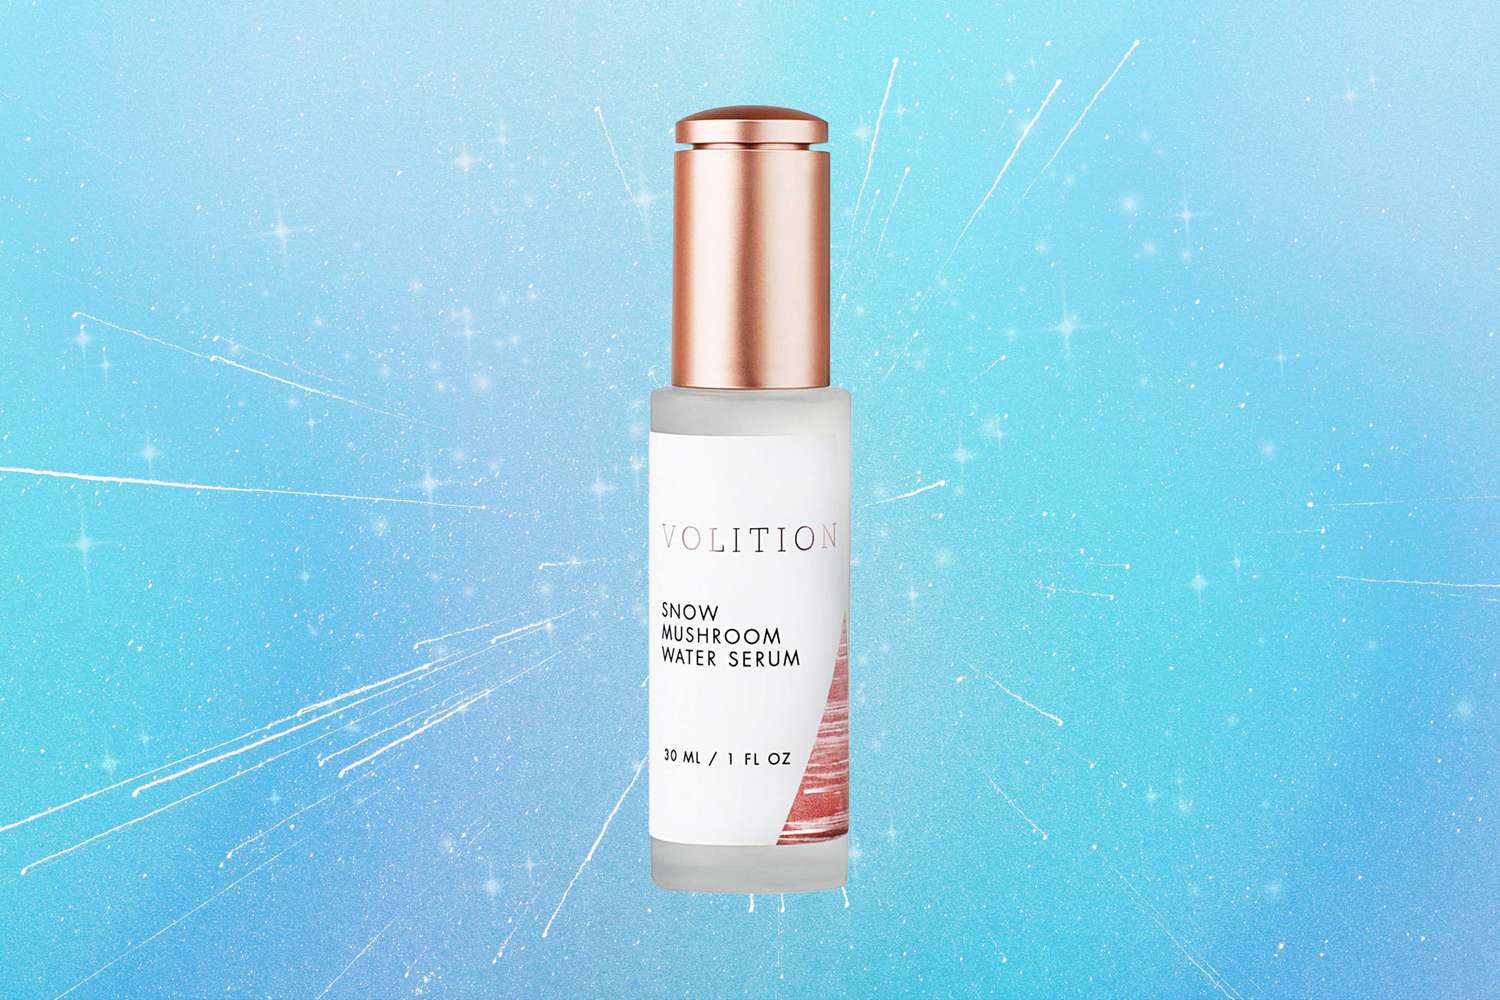 This-Mushroom-Infused-Serum-Is-So-Hydrating-I've-Been-Skipping-Moisturizer-for-The-First-Time-Ever